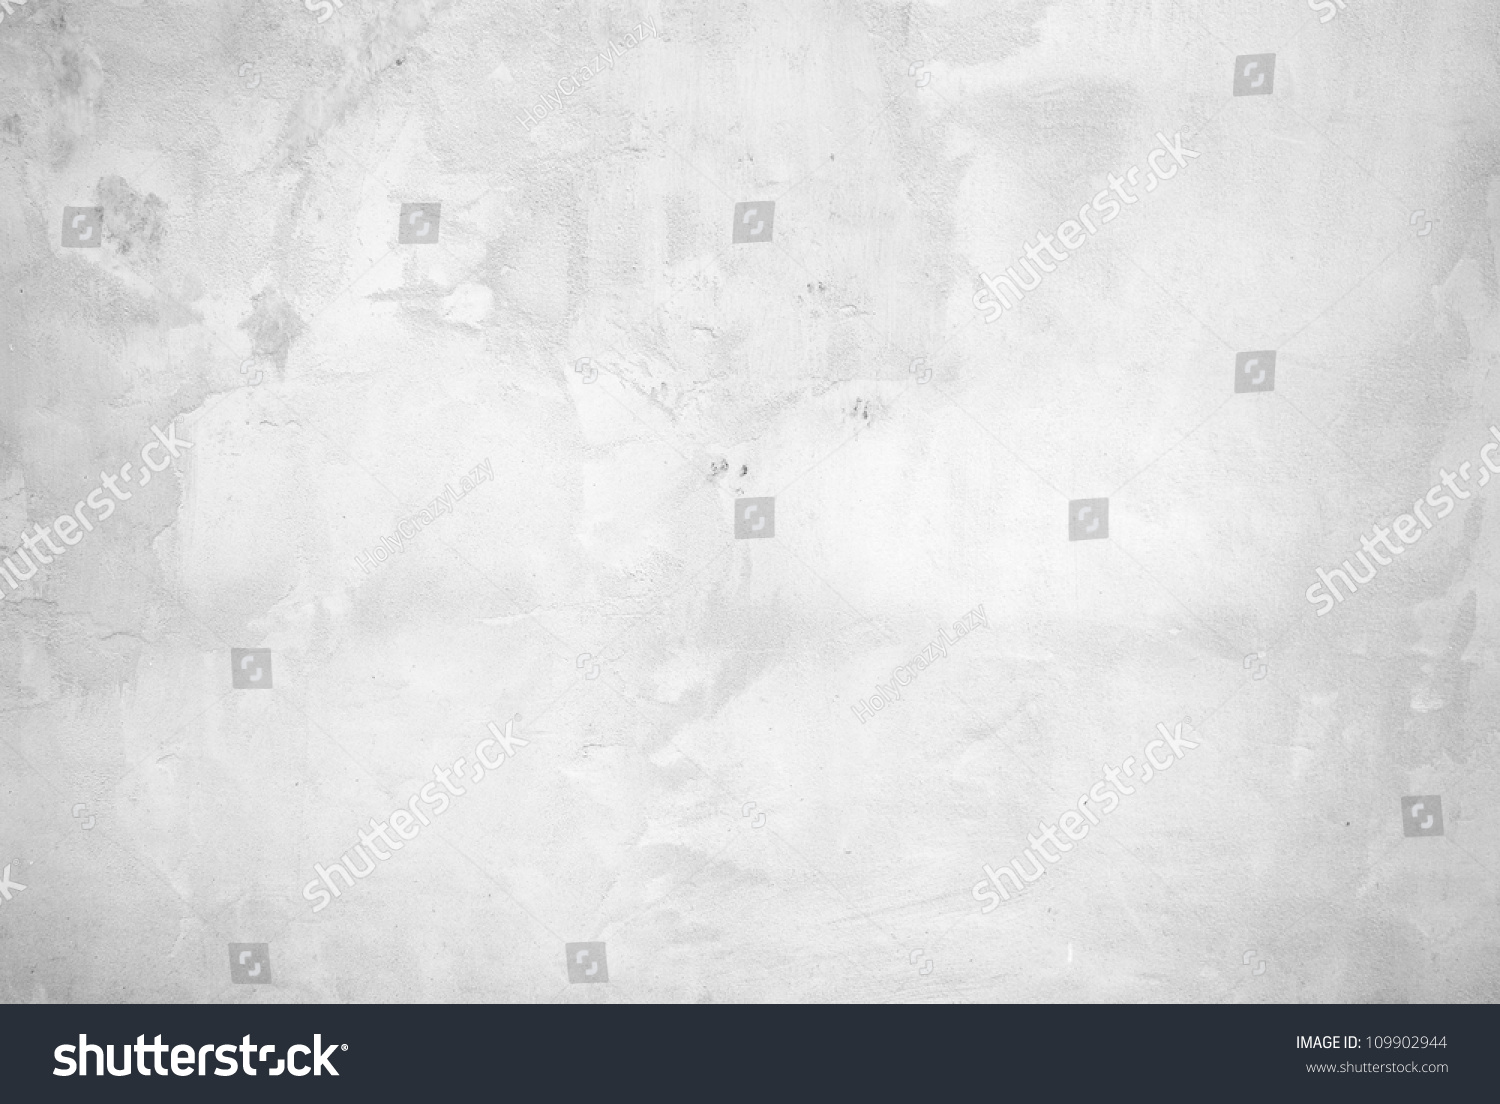 Vintage or grungy white background of natural cement or stone old texture as a retro pattern wall.  It is a concept, conceptual or metaphor wall banner, grunge, material, aged, rust or construction. #109902944